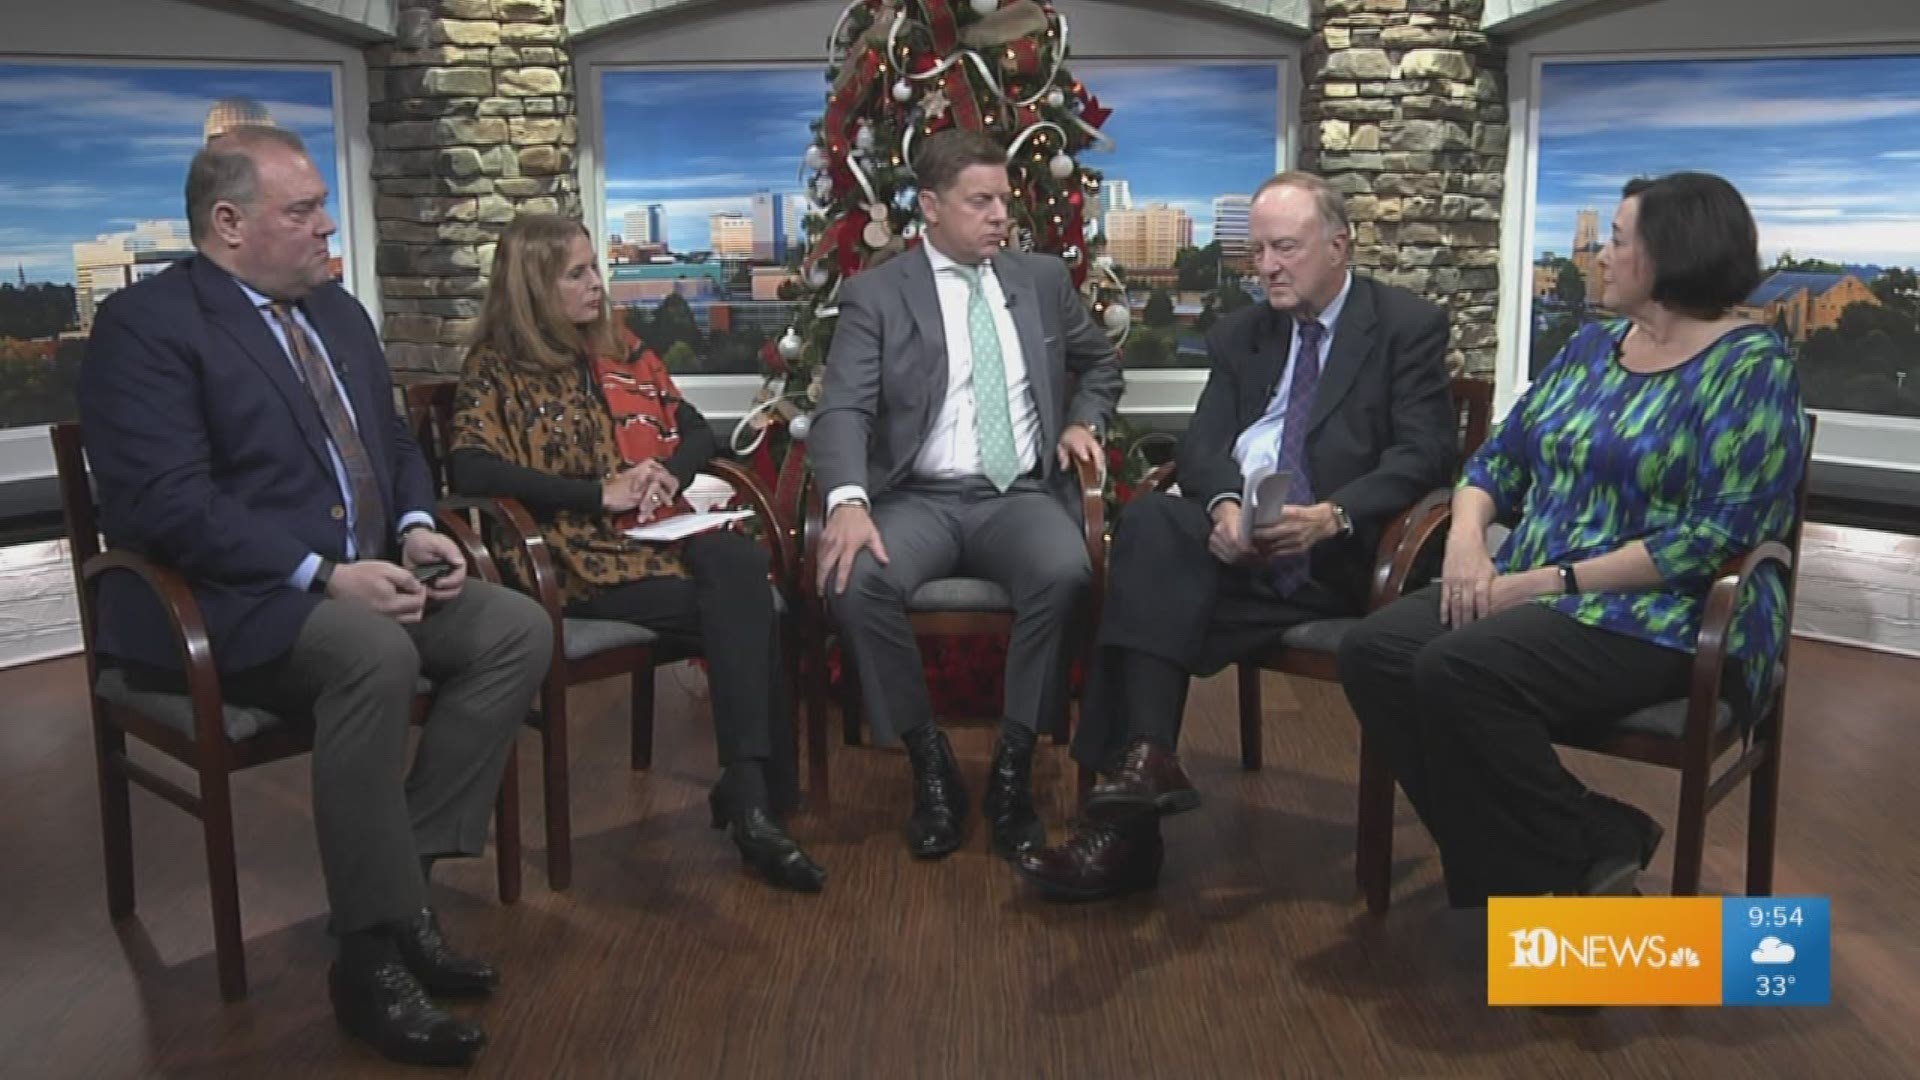 WBIR's "super panel" discusses likely winners, losers of 2020.